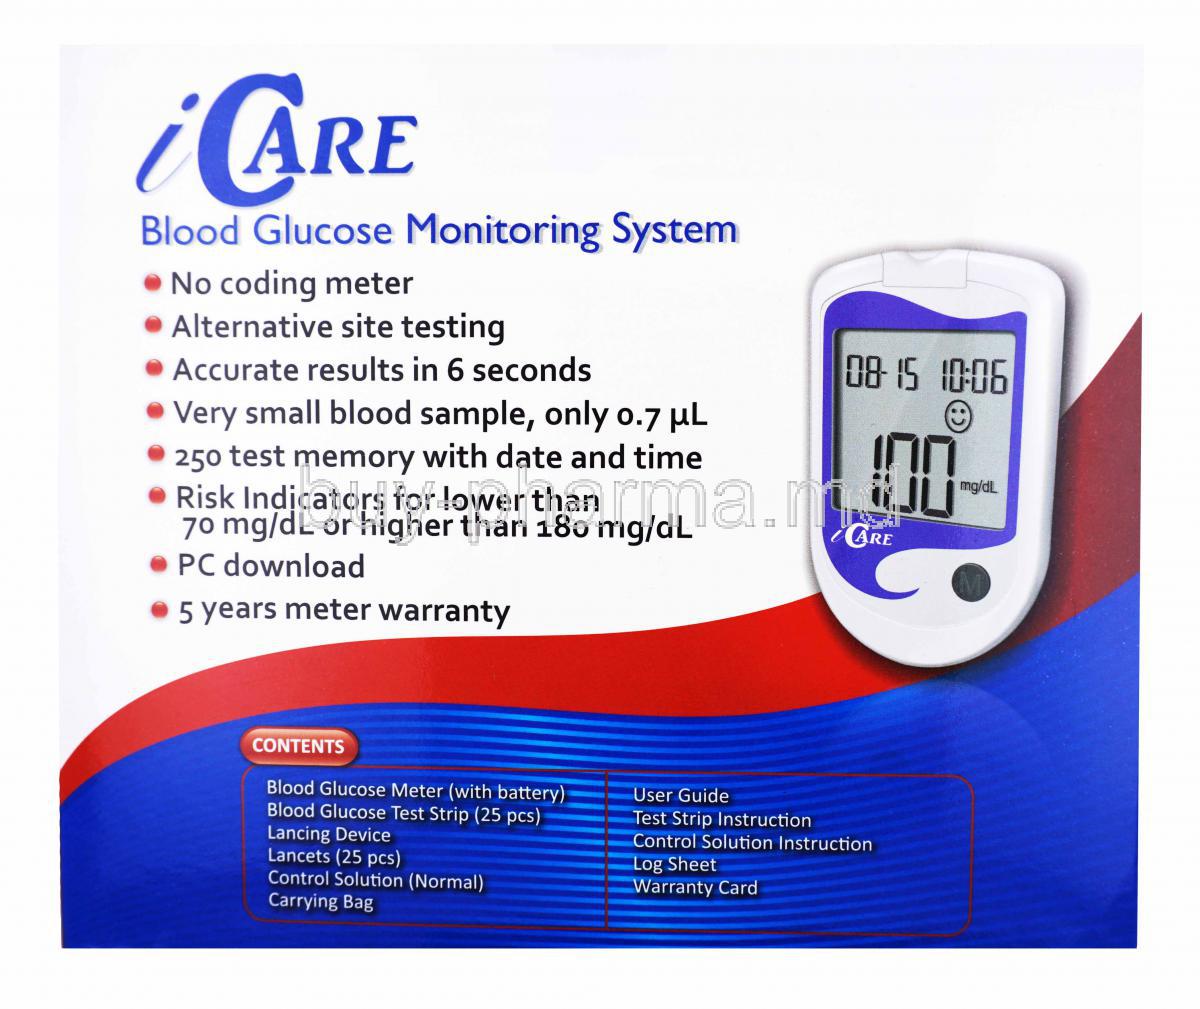 Icare Blood Glucose Monitoring system, Box front presentations, contents list.